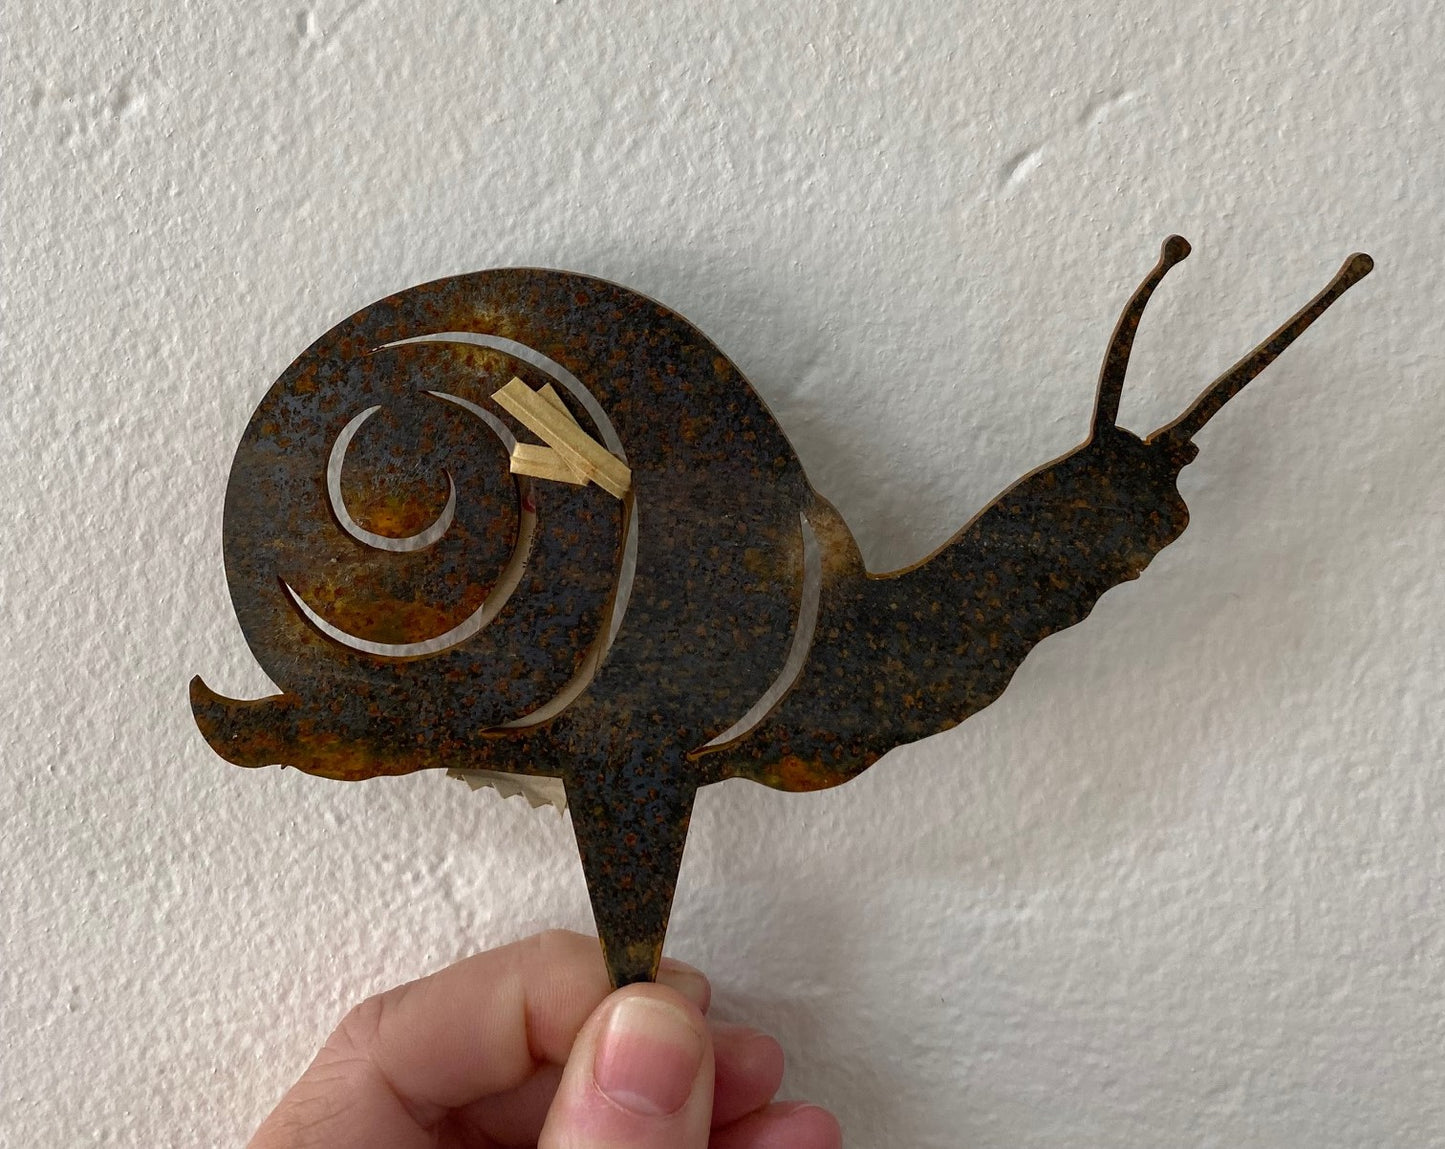 Small Snail by Design 2 fab